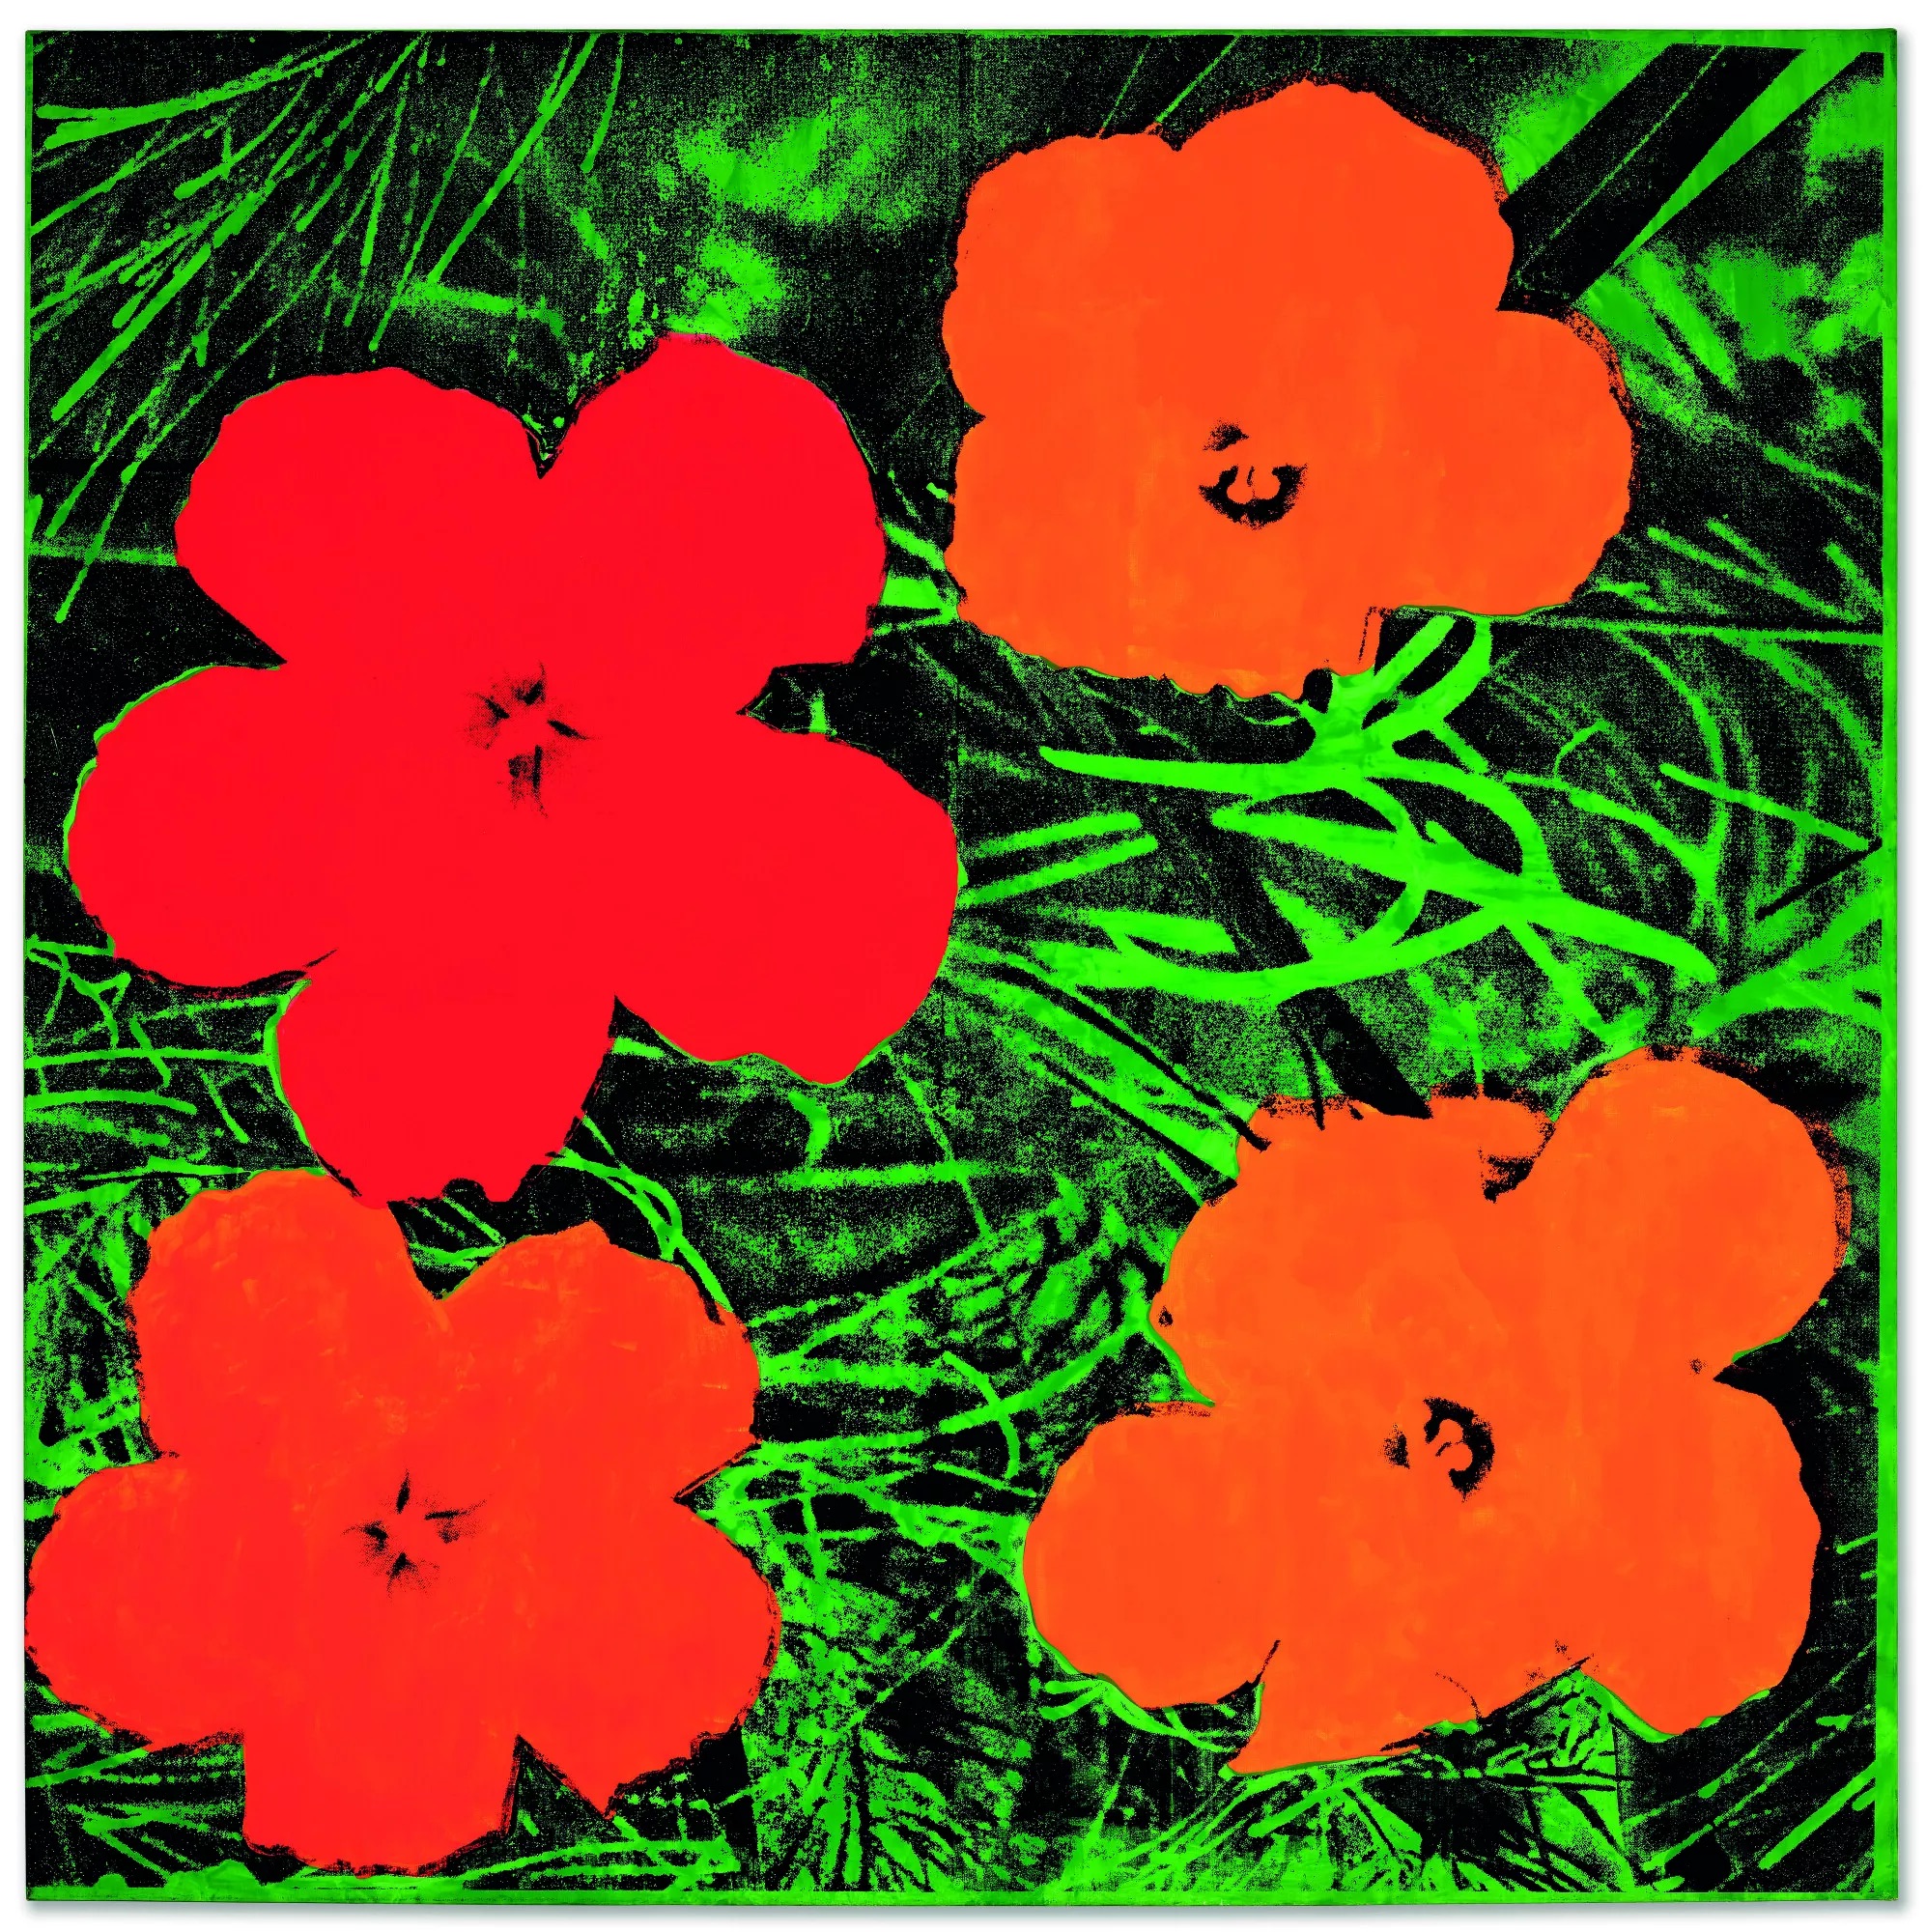 A stylized print of poppies on a background of grass